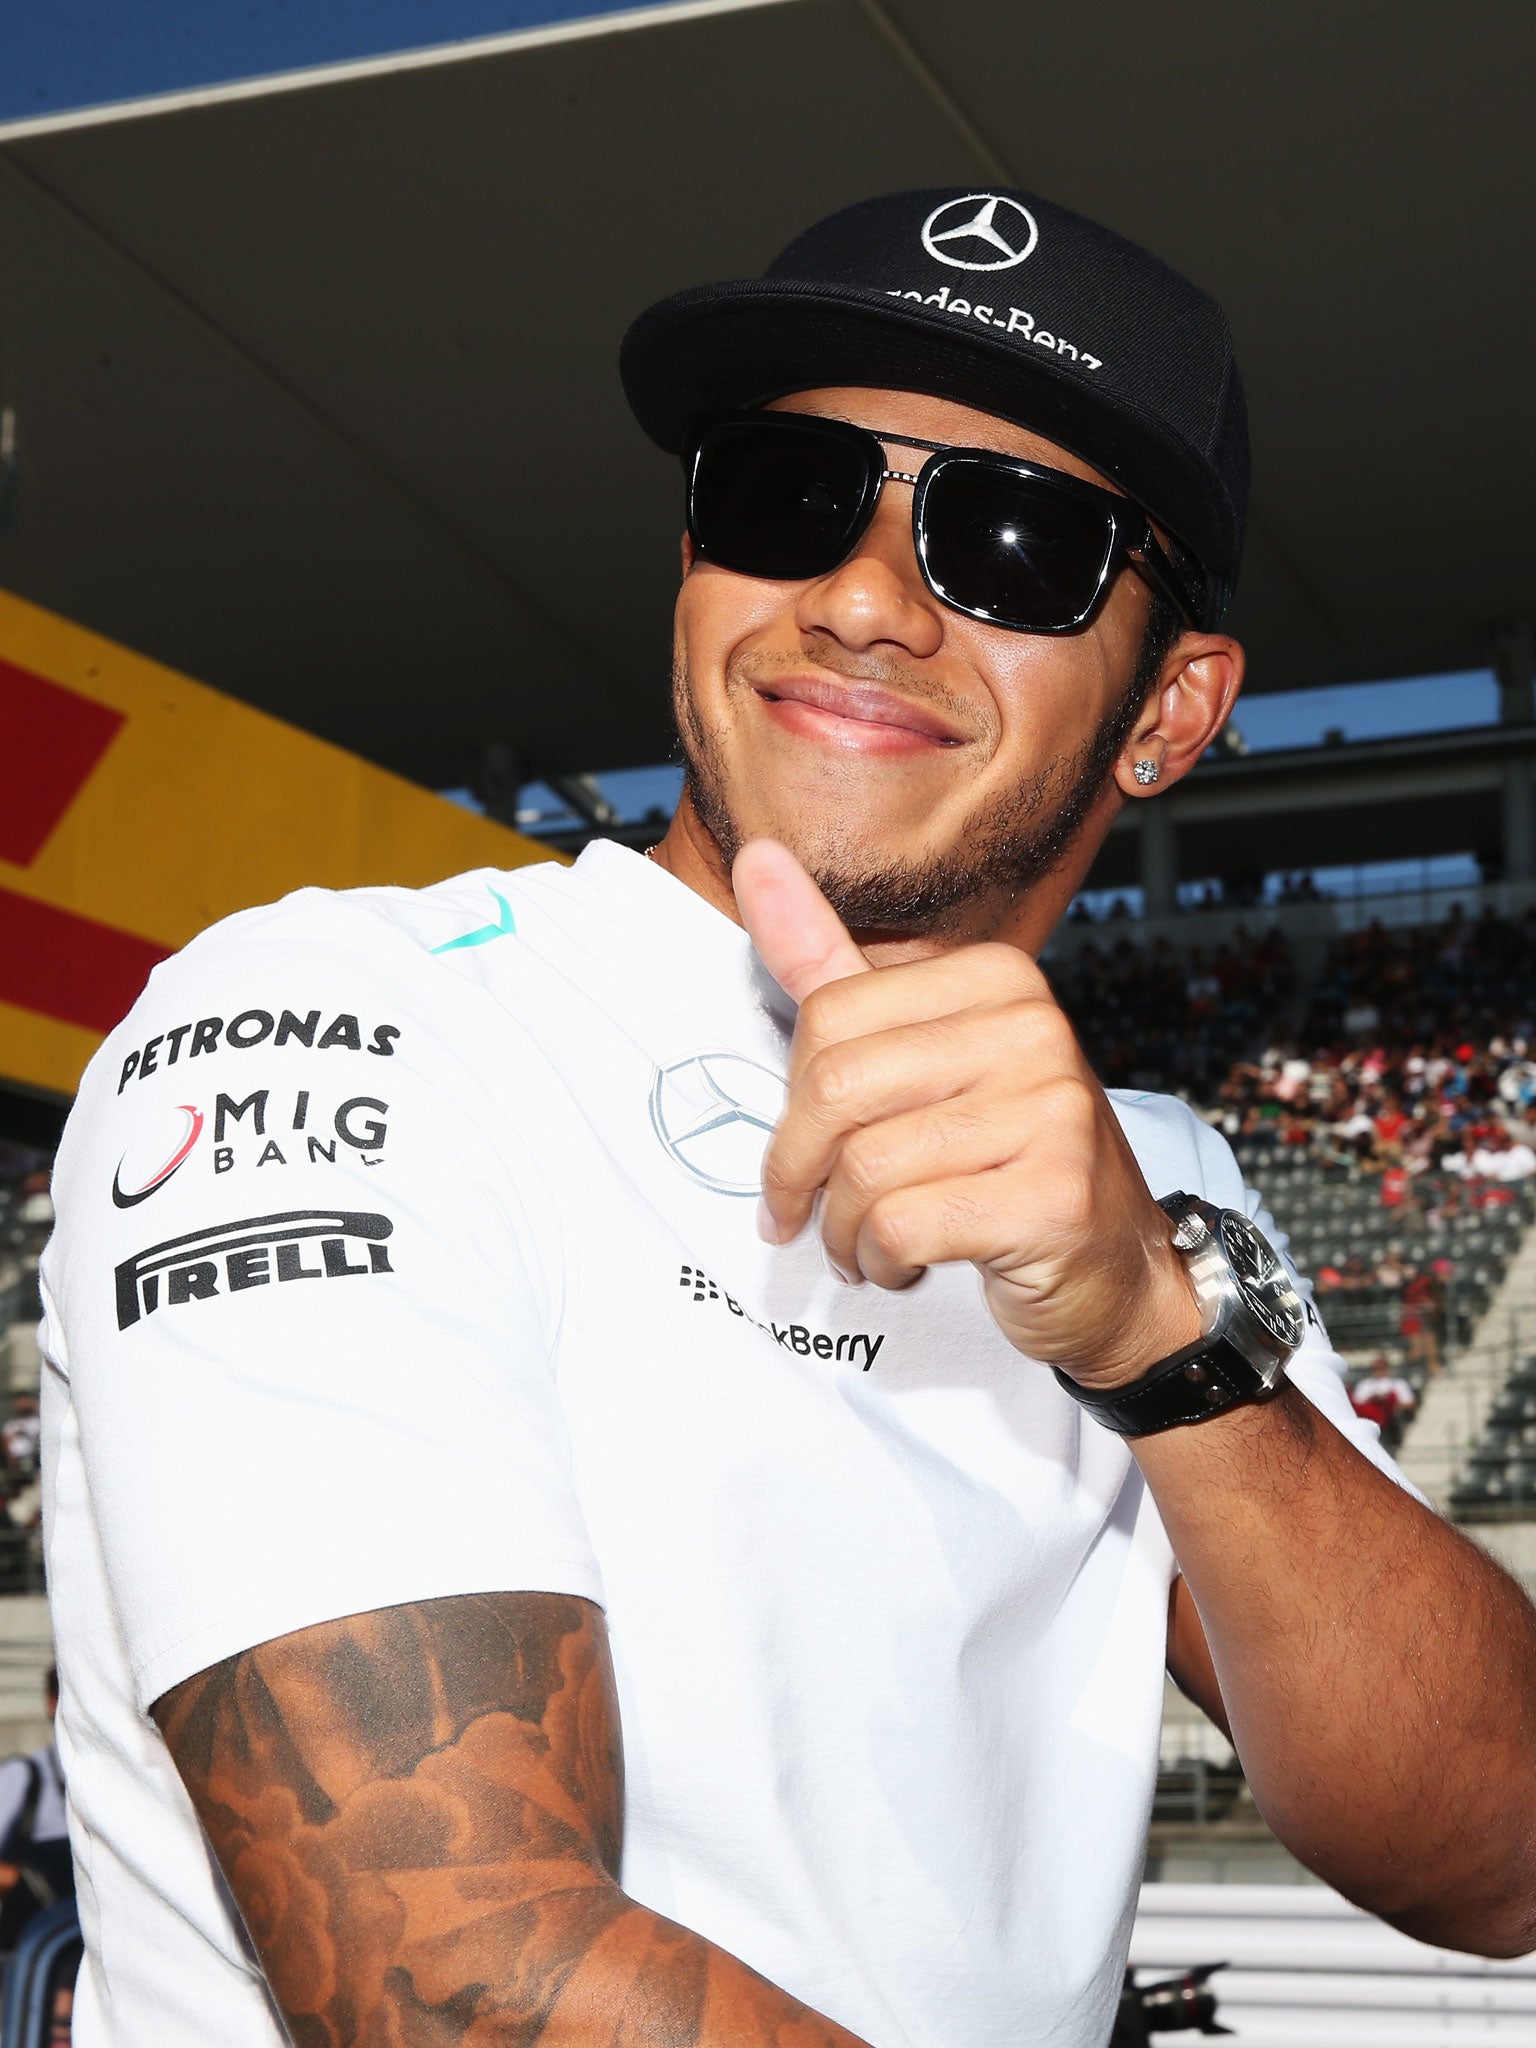 Lewis Hamilton was last week happy to settle for fourth place – but where's the fun in that?